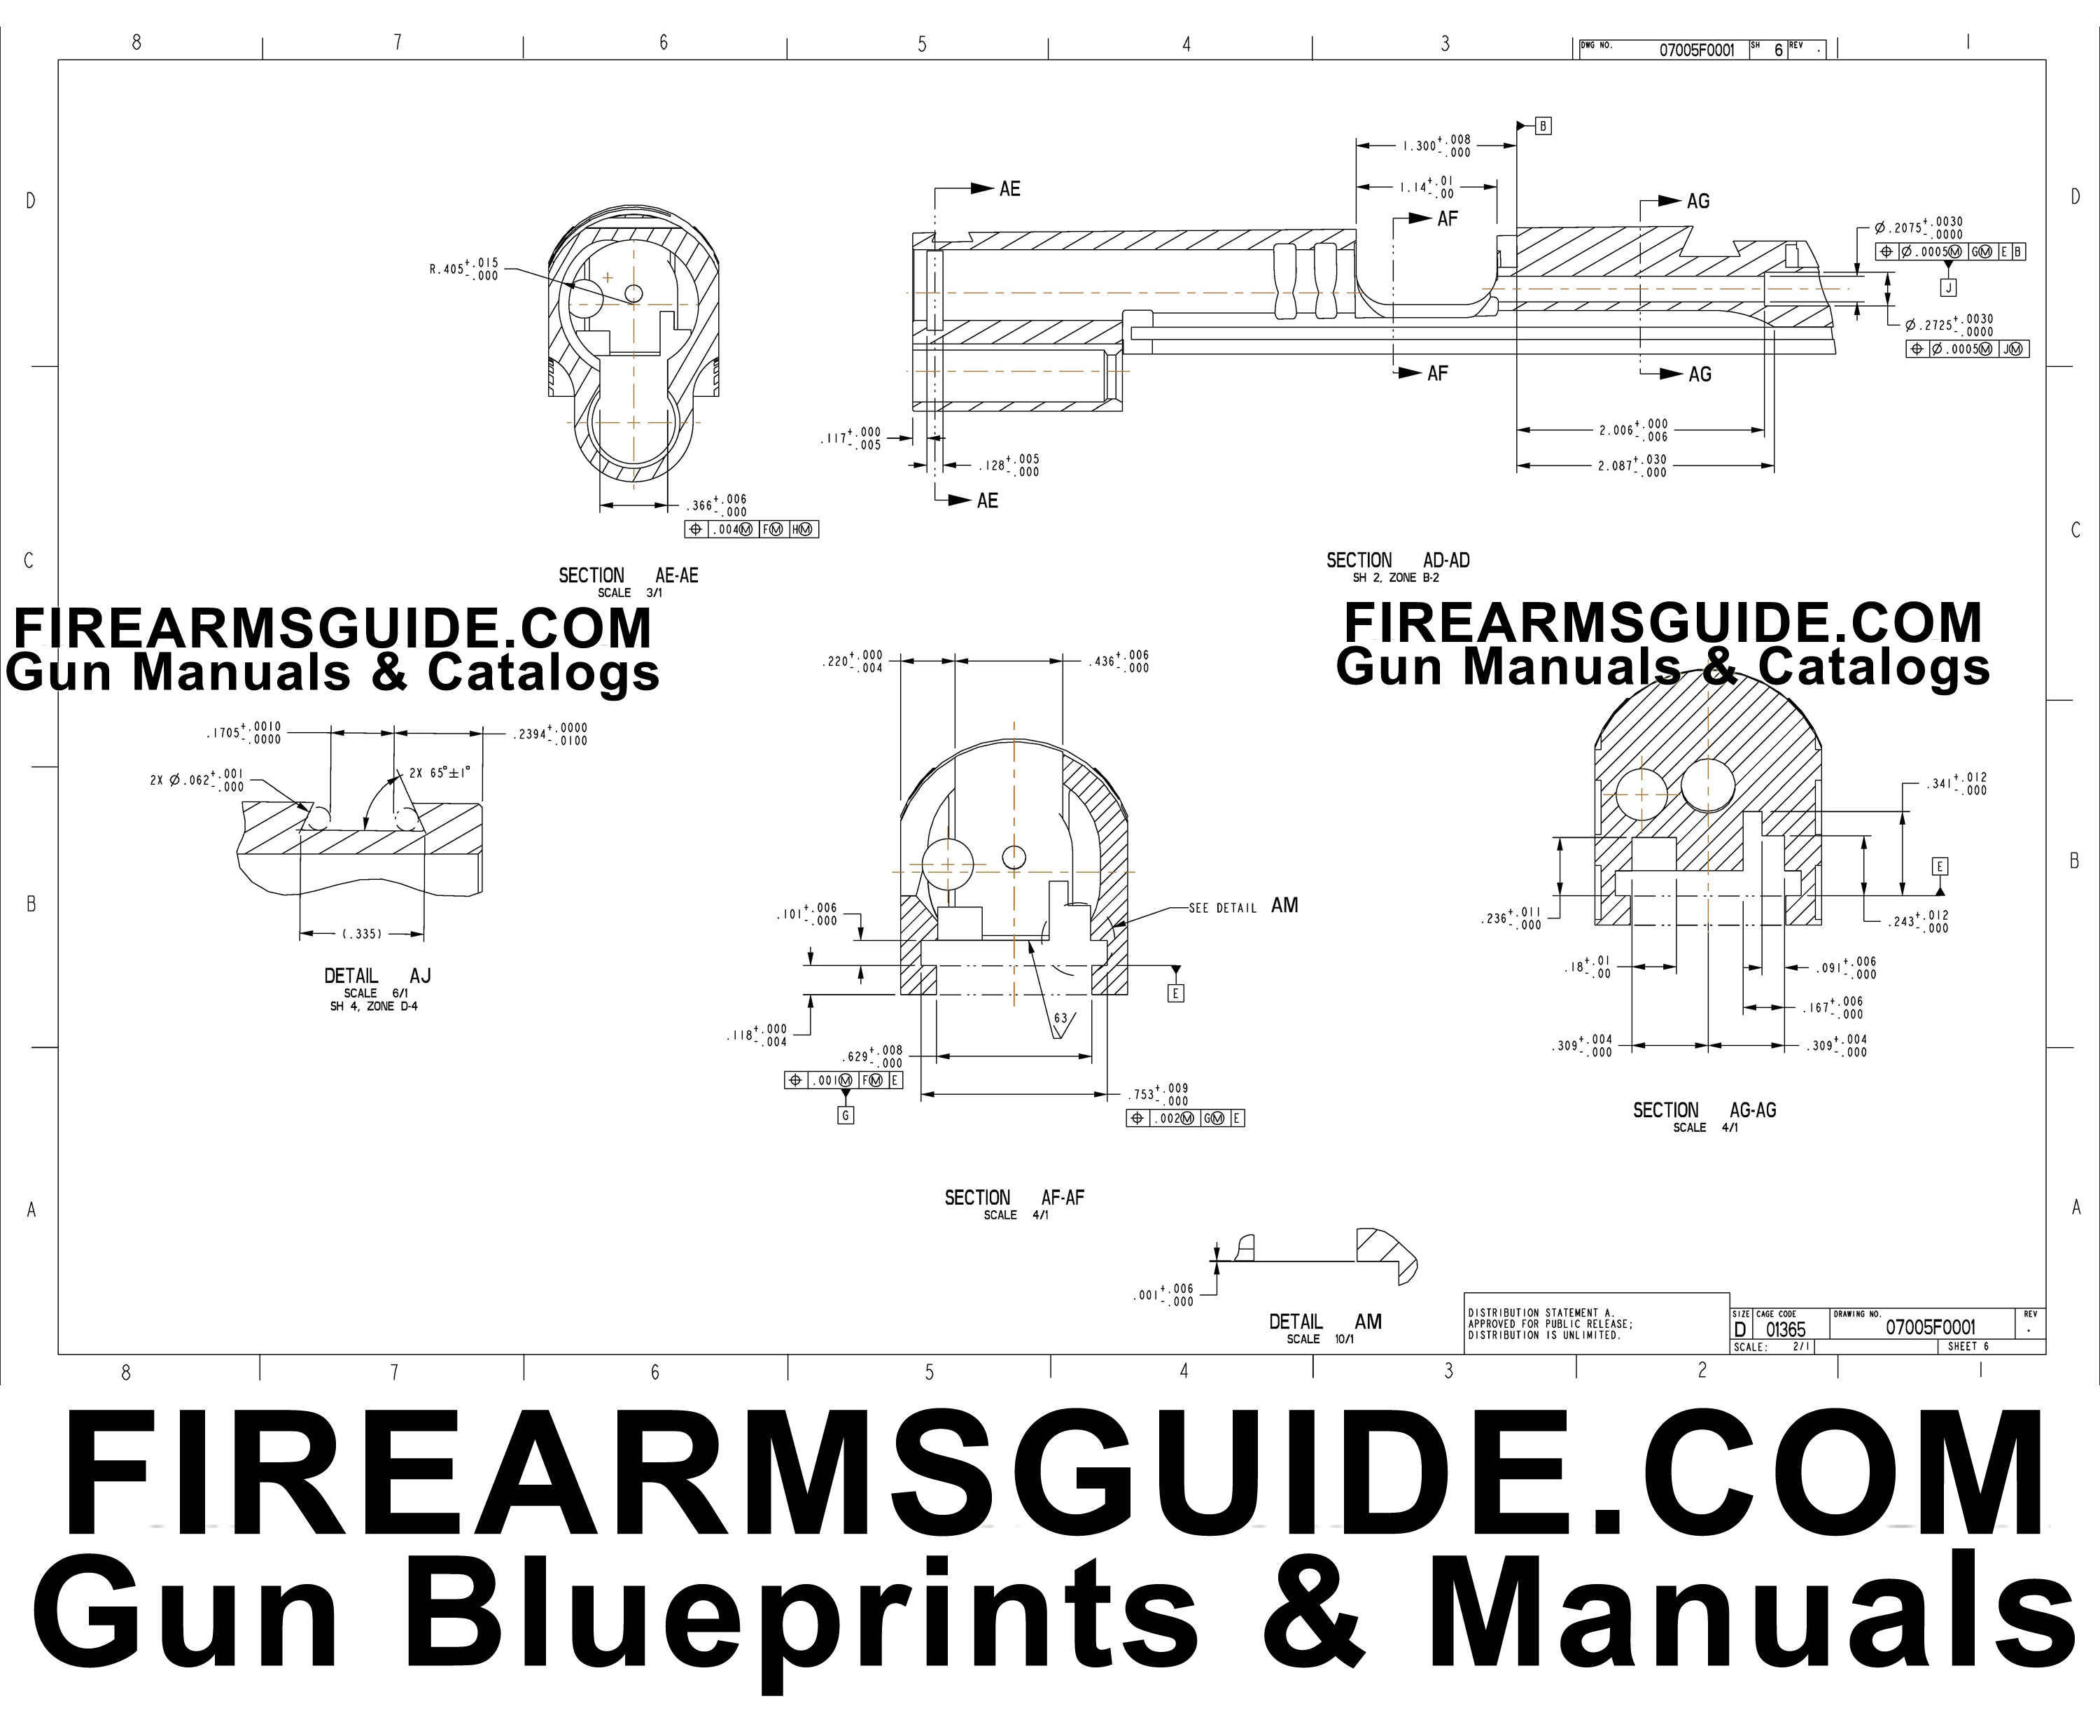 Firearms Guide has the World's Largest GUNSMITHING LIBRARY with